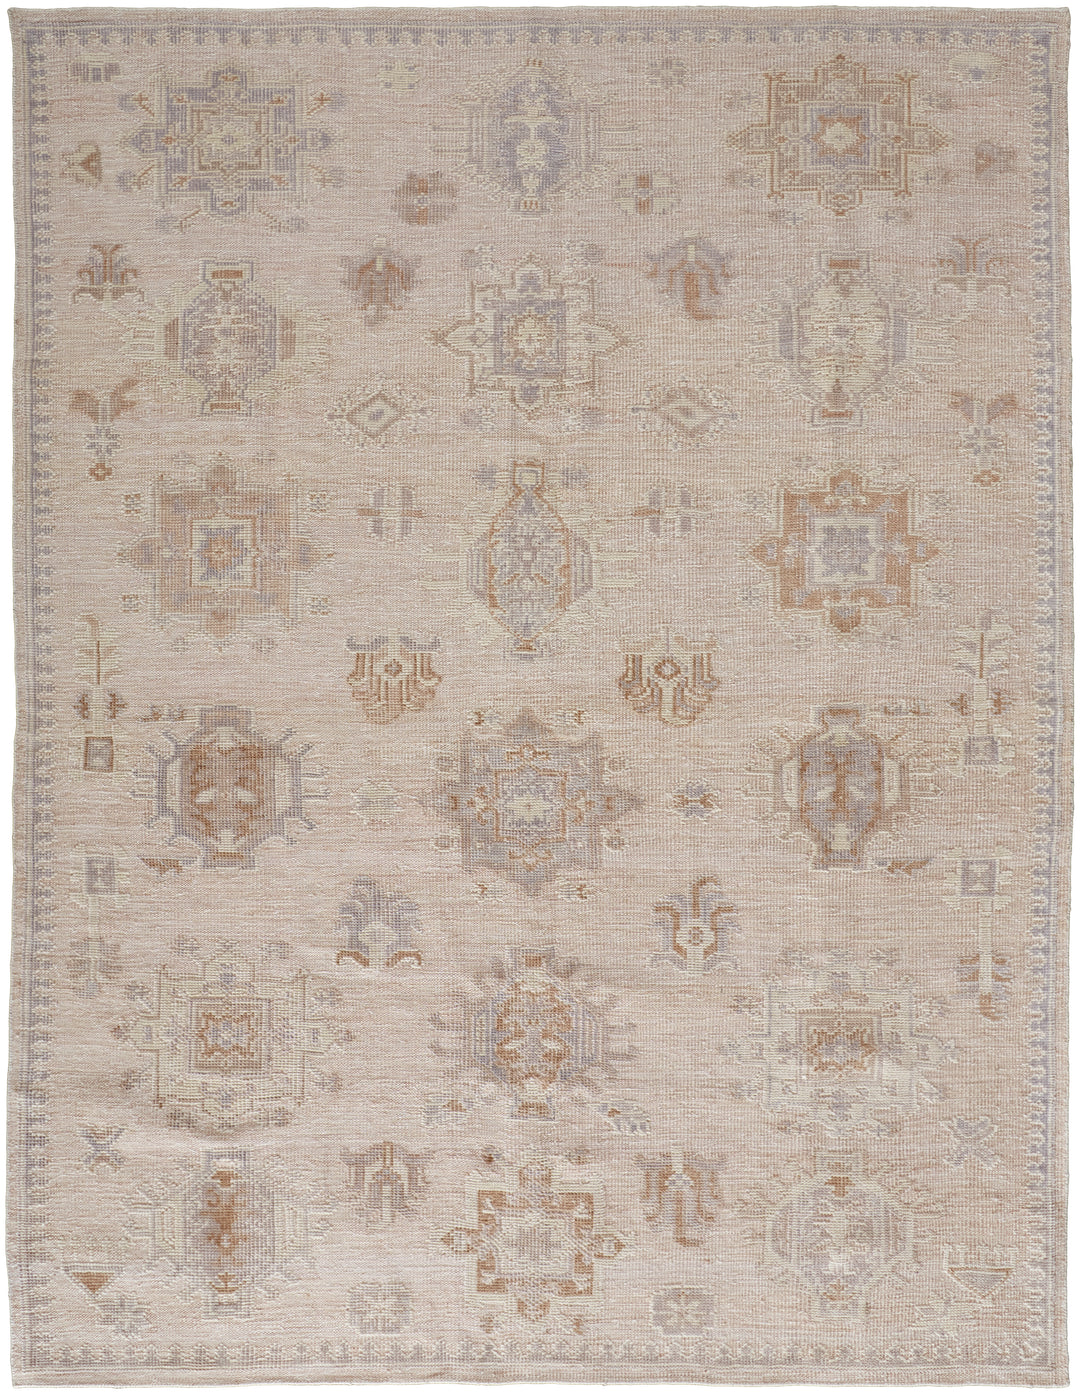 Wendover Transitional Oriental in Tan/Brown Area Rug - Available in 5 Sizes